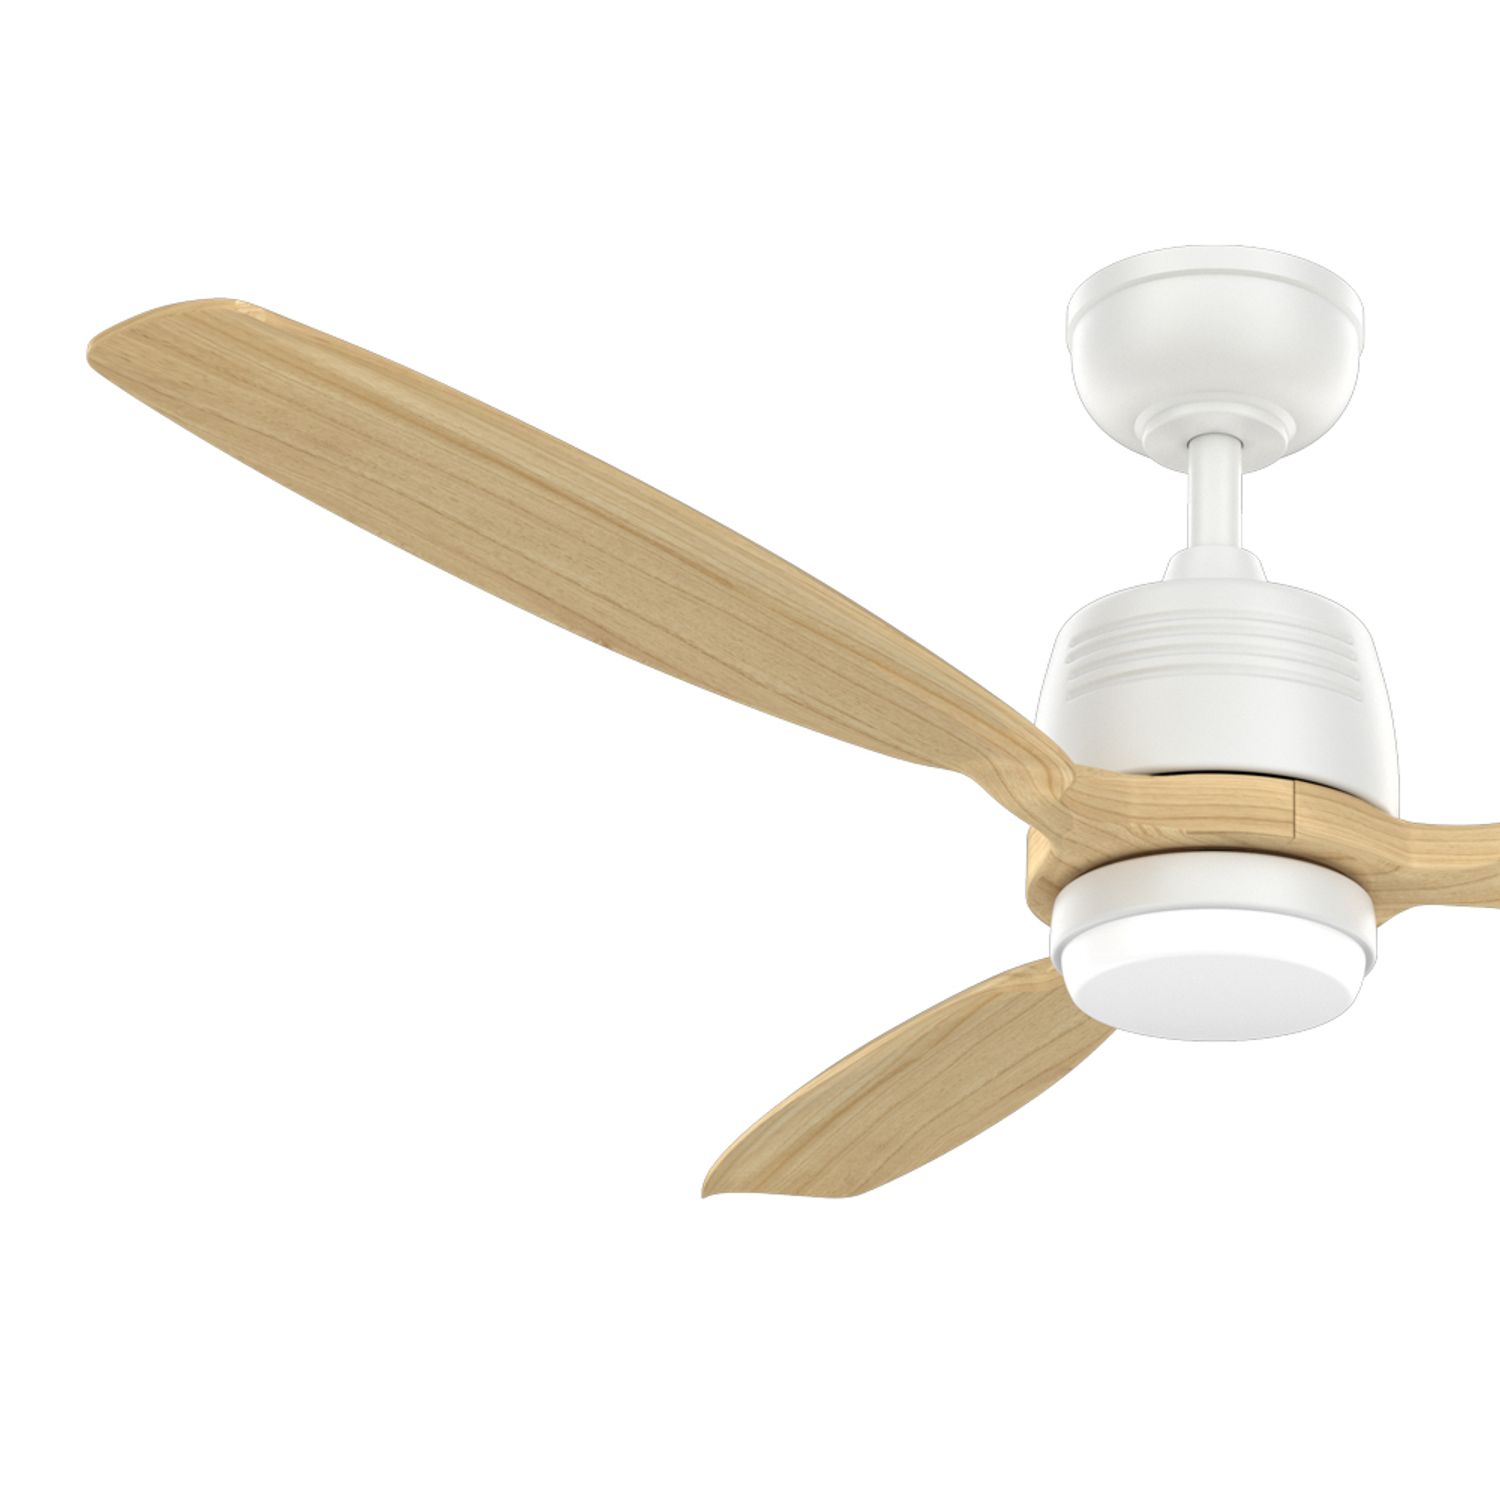 KBS 52-Inch High-Speed White and Wood Colour Ceiling Fan Blade